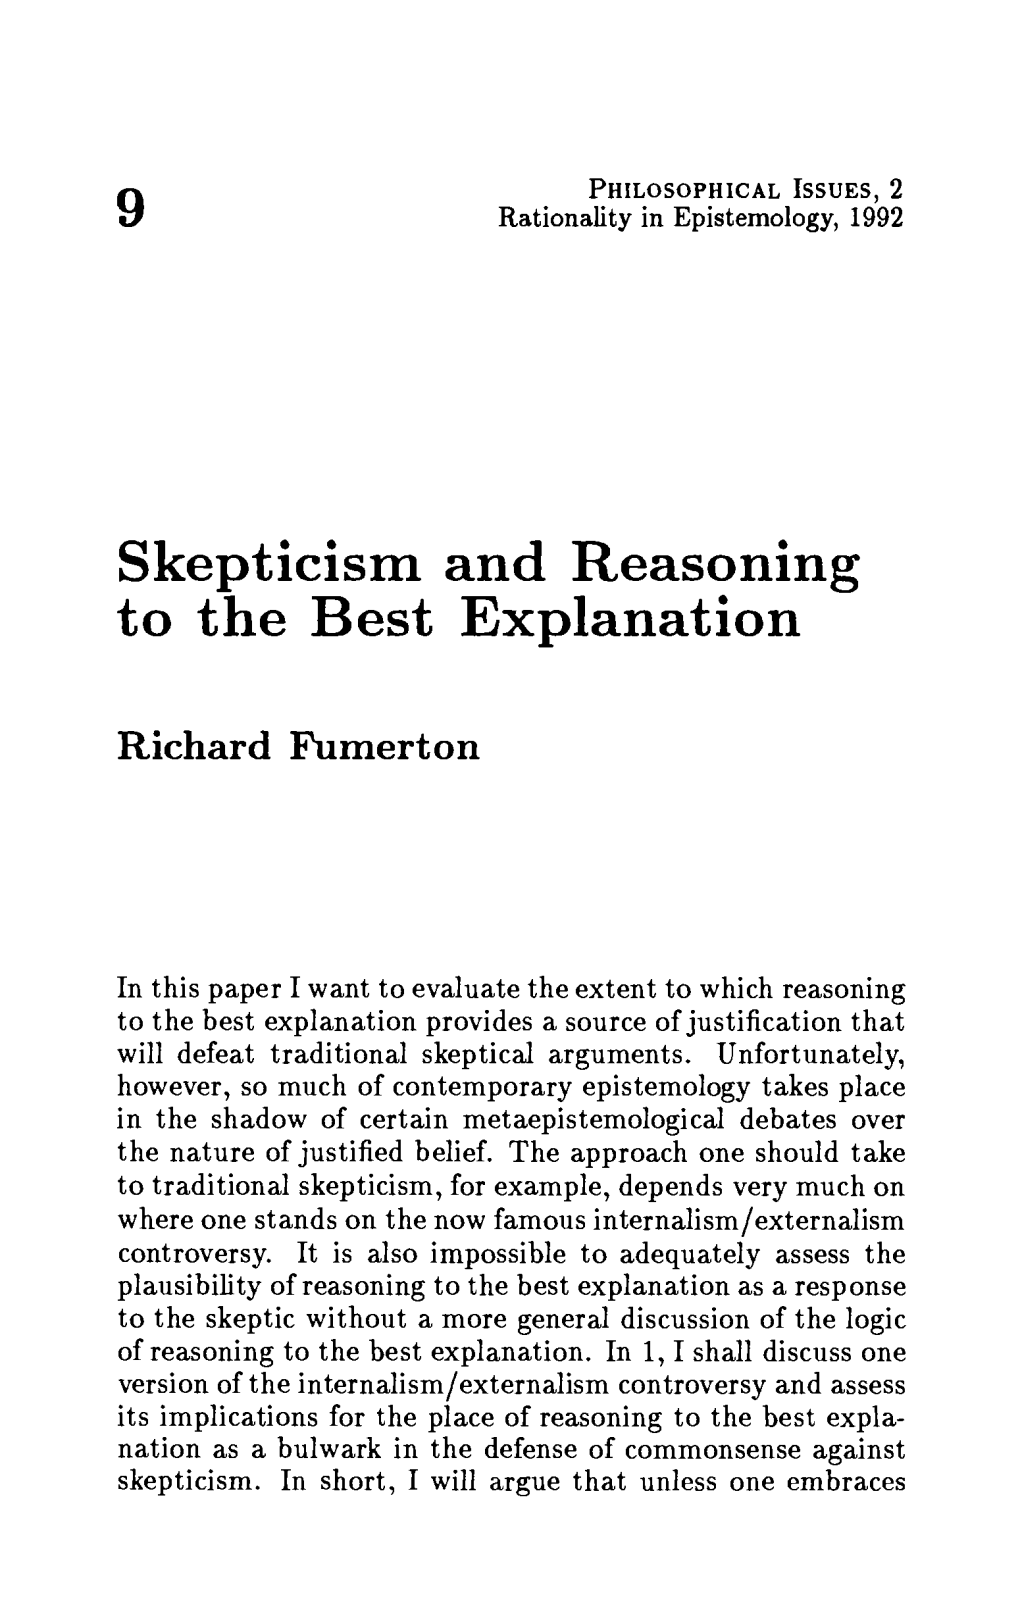 Skepticism and Reasoning to the Best Explanation